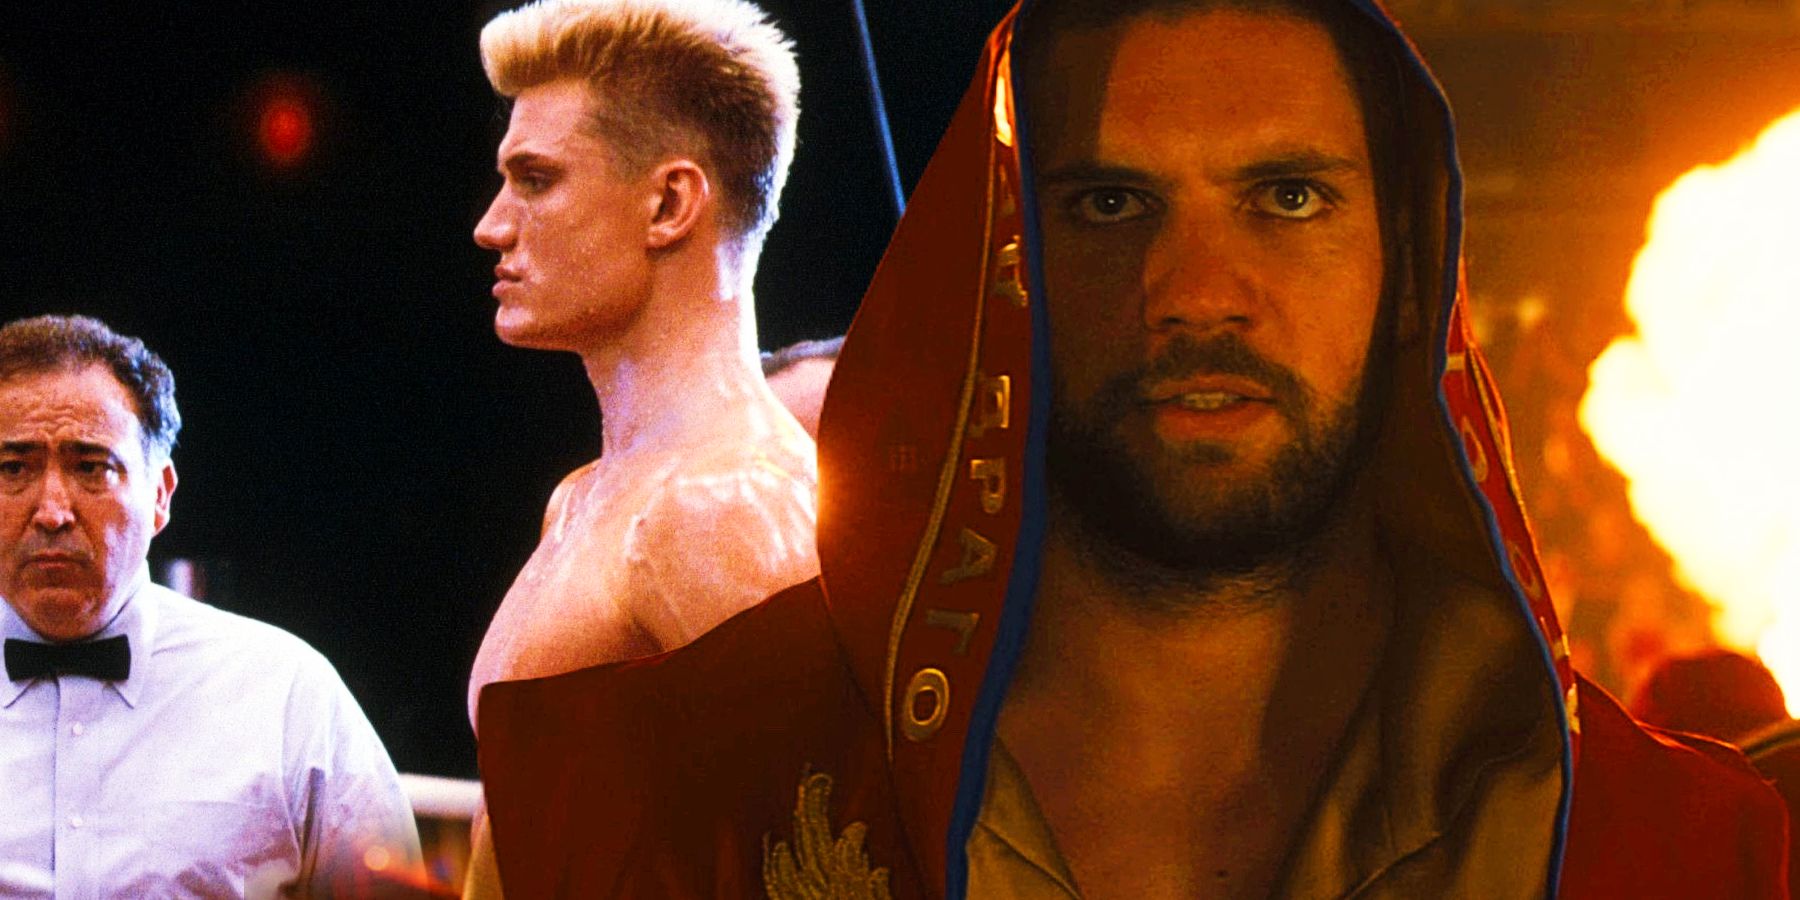 Dolph Lundgren as Ivan Drago in Rocky IV and Florian Munteanu as Viktor Drago in Creed II